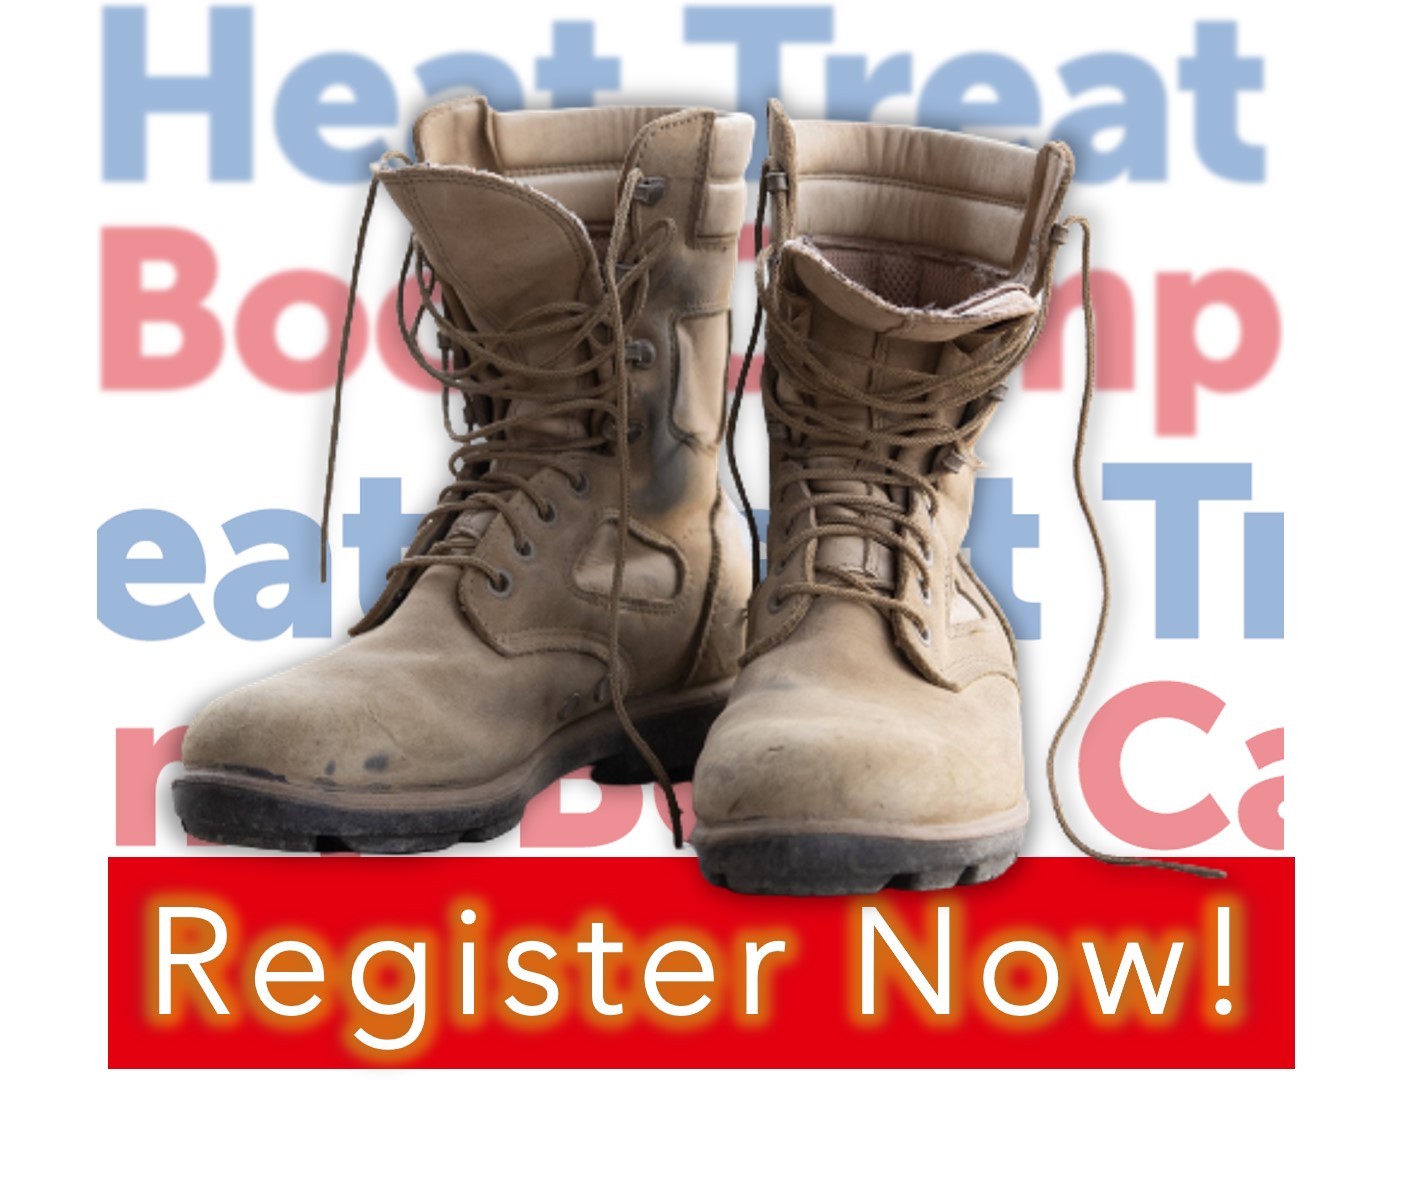 Boots on Heat Treat Book Camp – register!